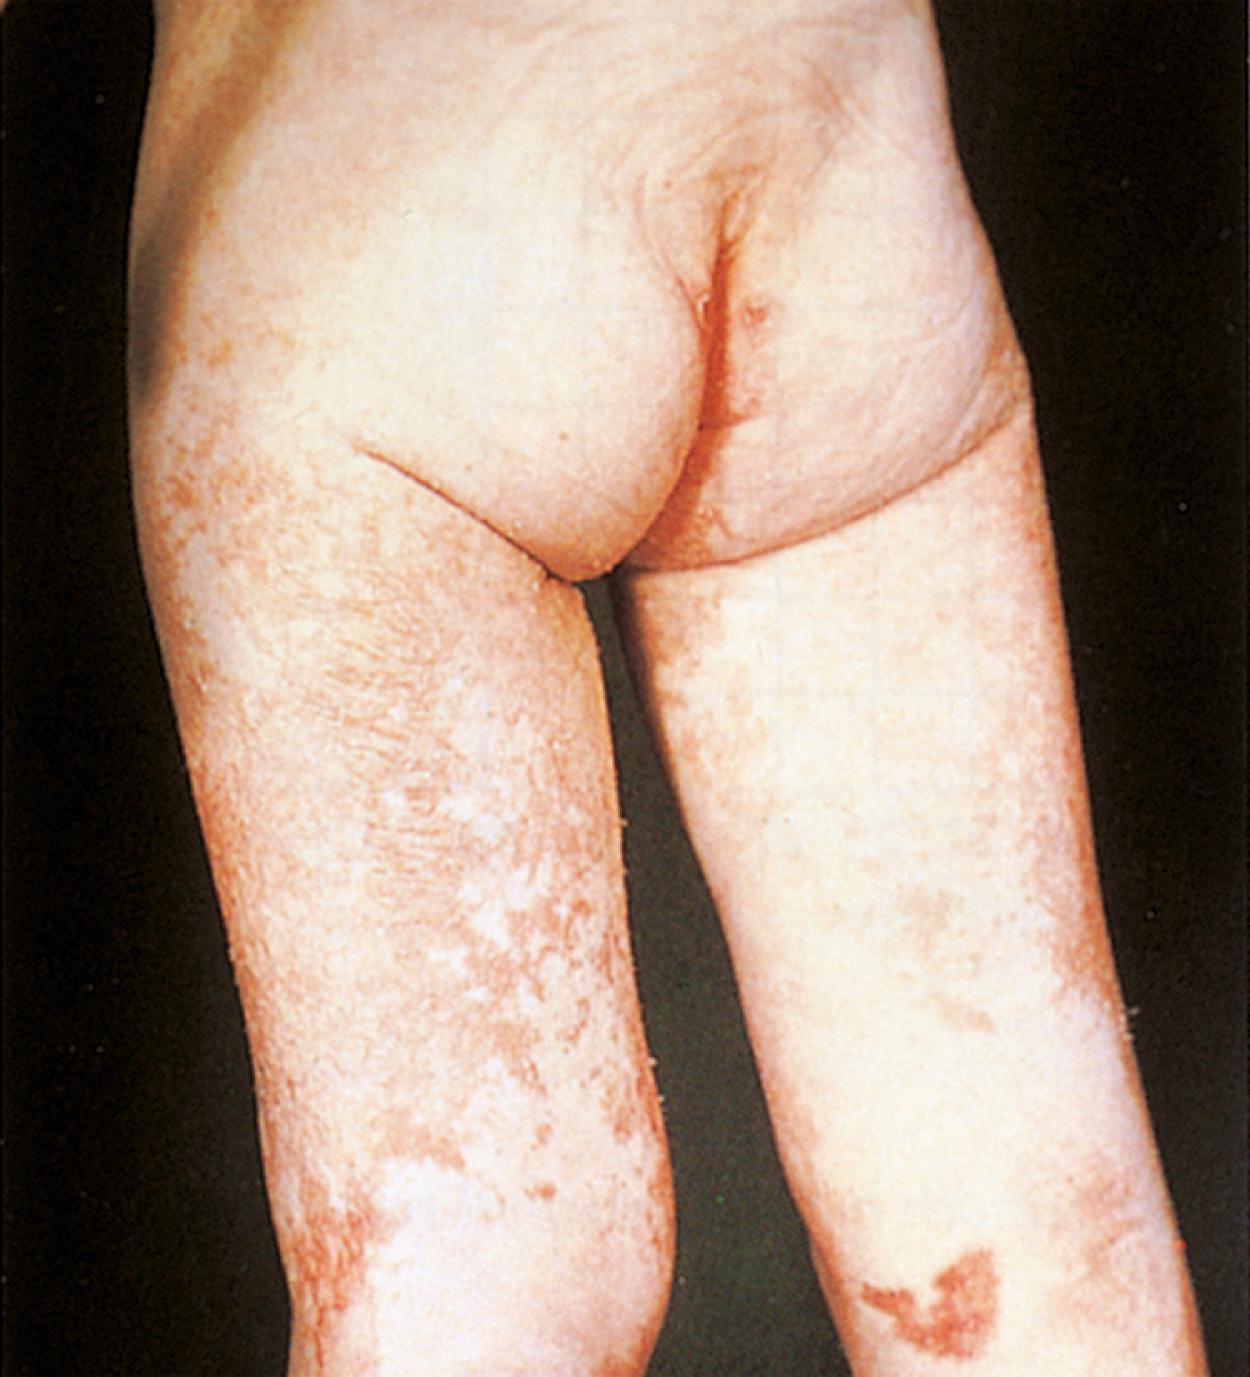 Fig. 11.7, Kwashiorkor. The rash of kwashiorkor is scaly and erythematous and may weep, especially in edematous areas.